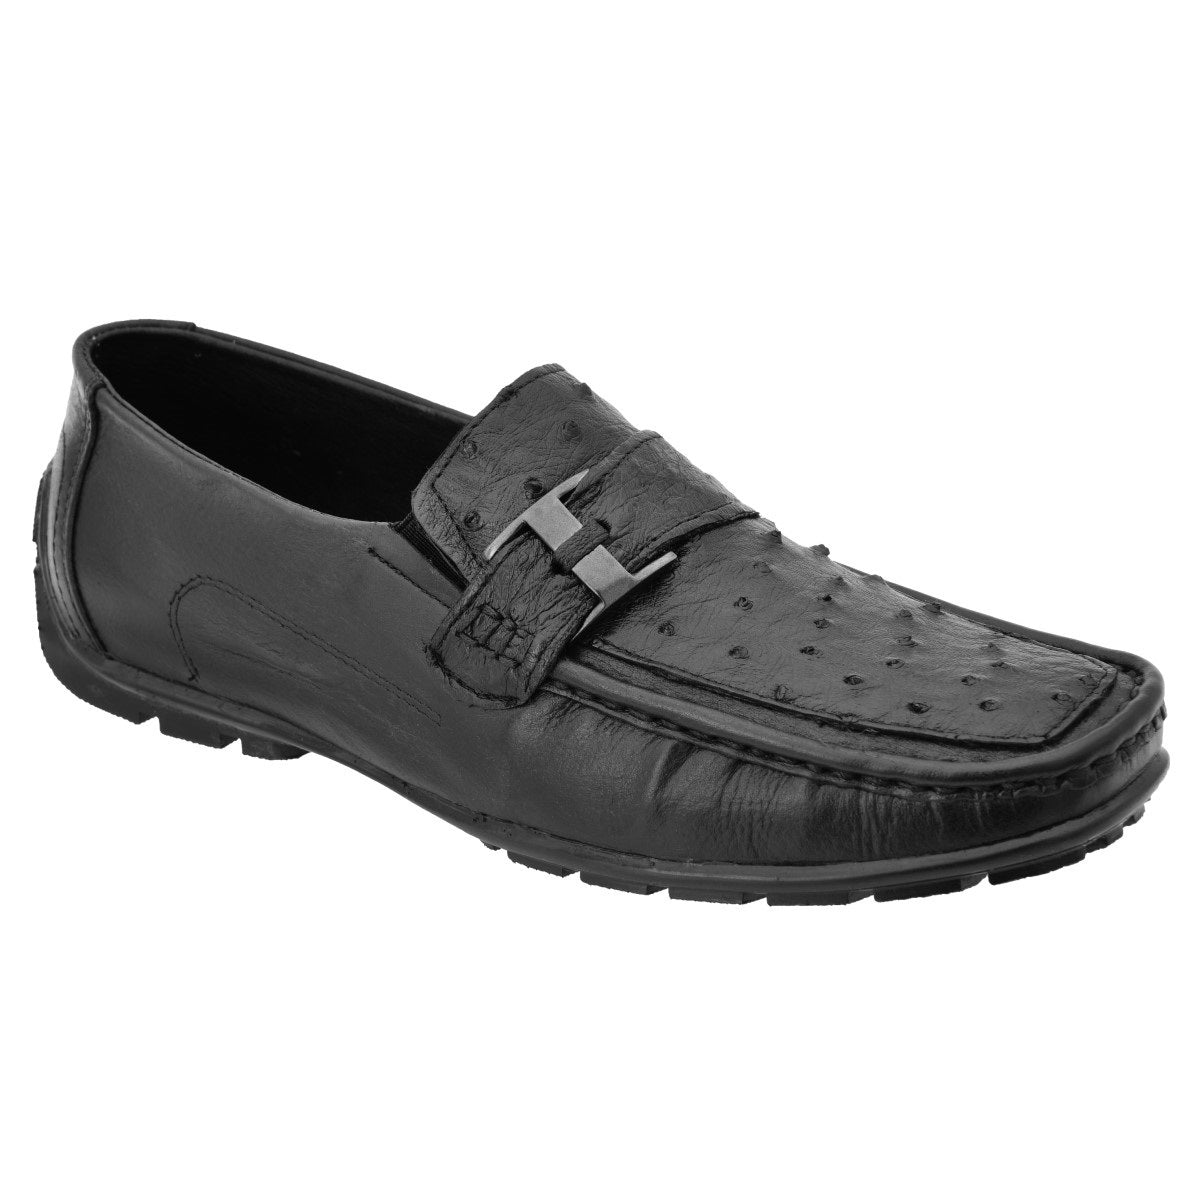 Zapatos casuales para Hombres / Casual Shoes for men – Nantli's - Online  Store